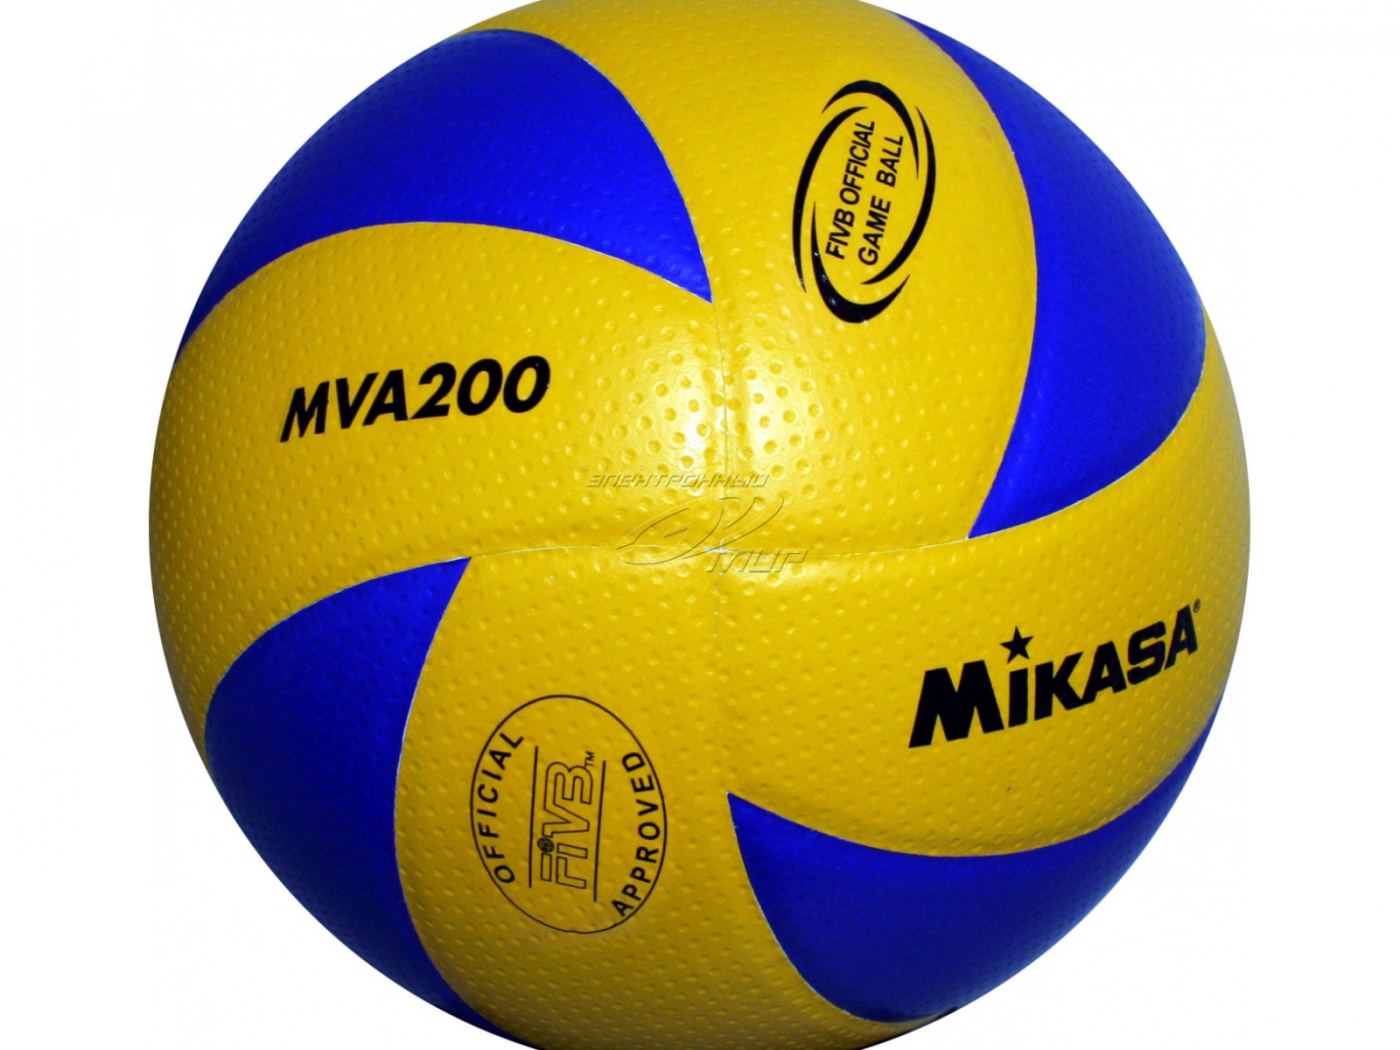 Volleyball ball on a white background